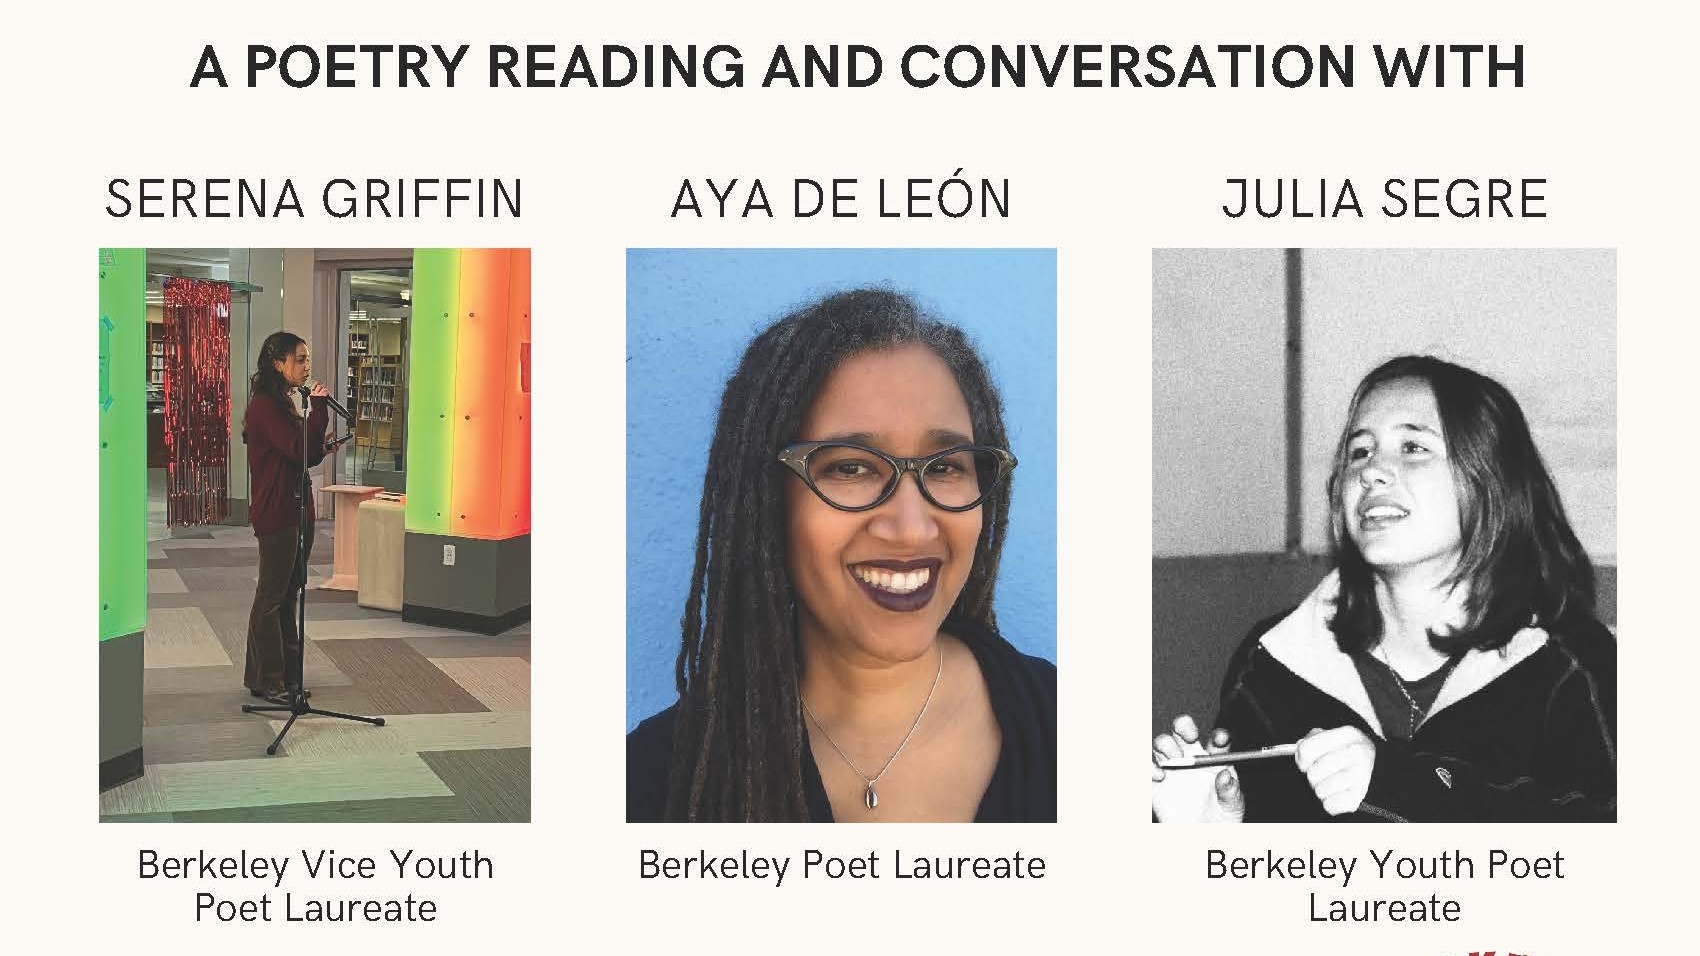 A poetry reading and conversation with Serena Griffin, Berkeley Vice Youth Poet Laureate; Aya de Leon, Berkeley Poet Laureate; and Julia Segre, Berkeley Youth Poet Laureate